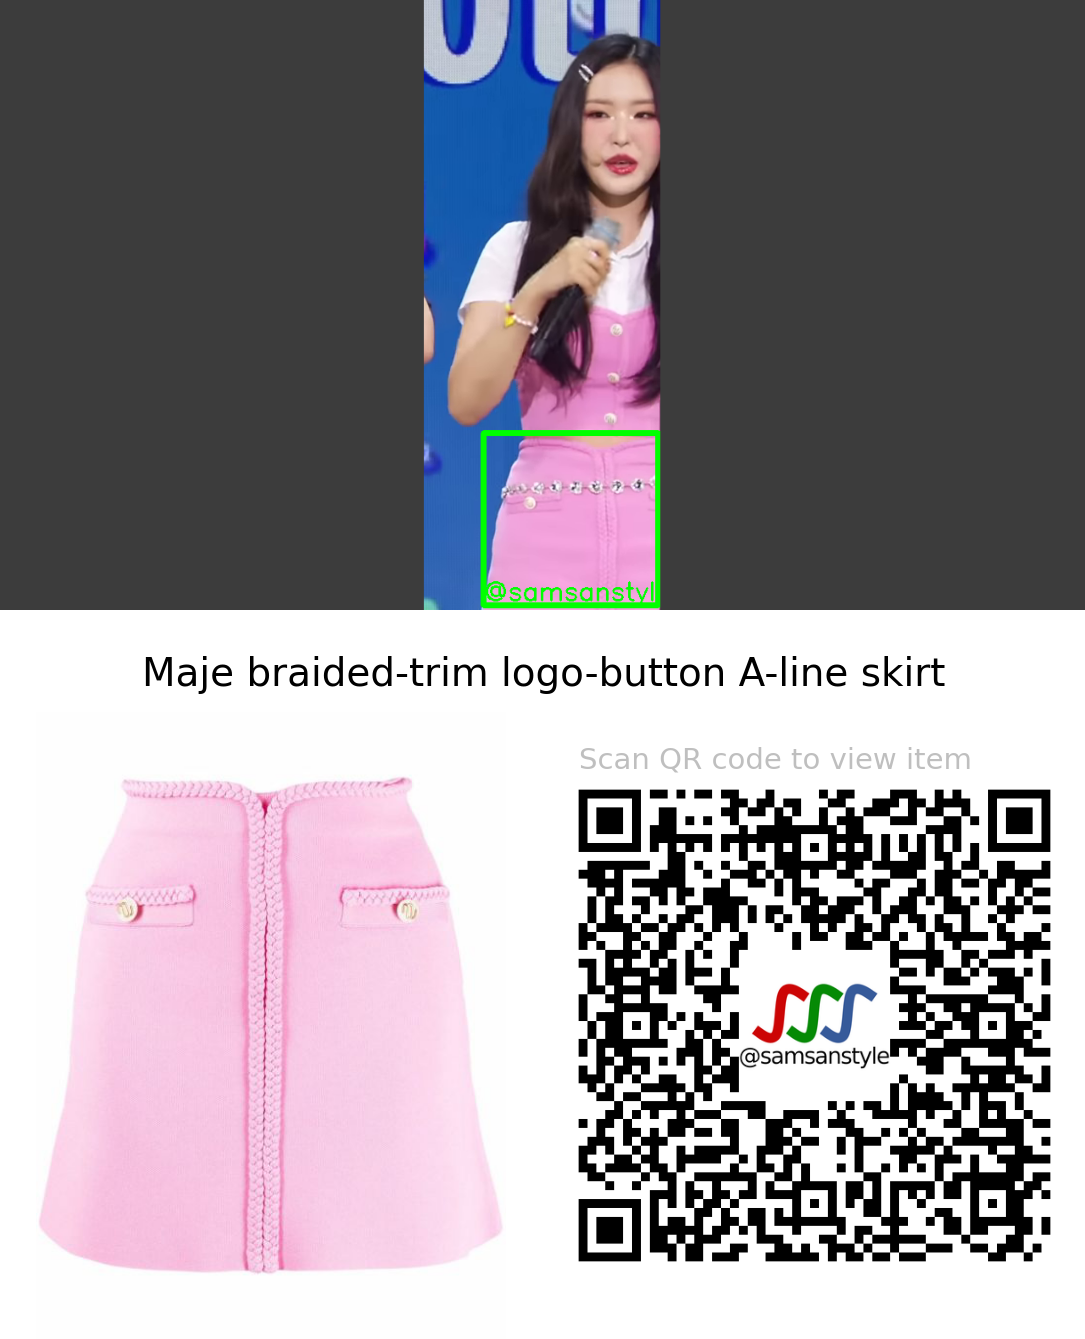 LOONA Olivia Hye | Flip That SBS MTV The Show | Maje braided-trim logo-button A-line skirt